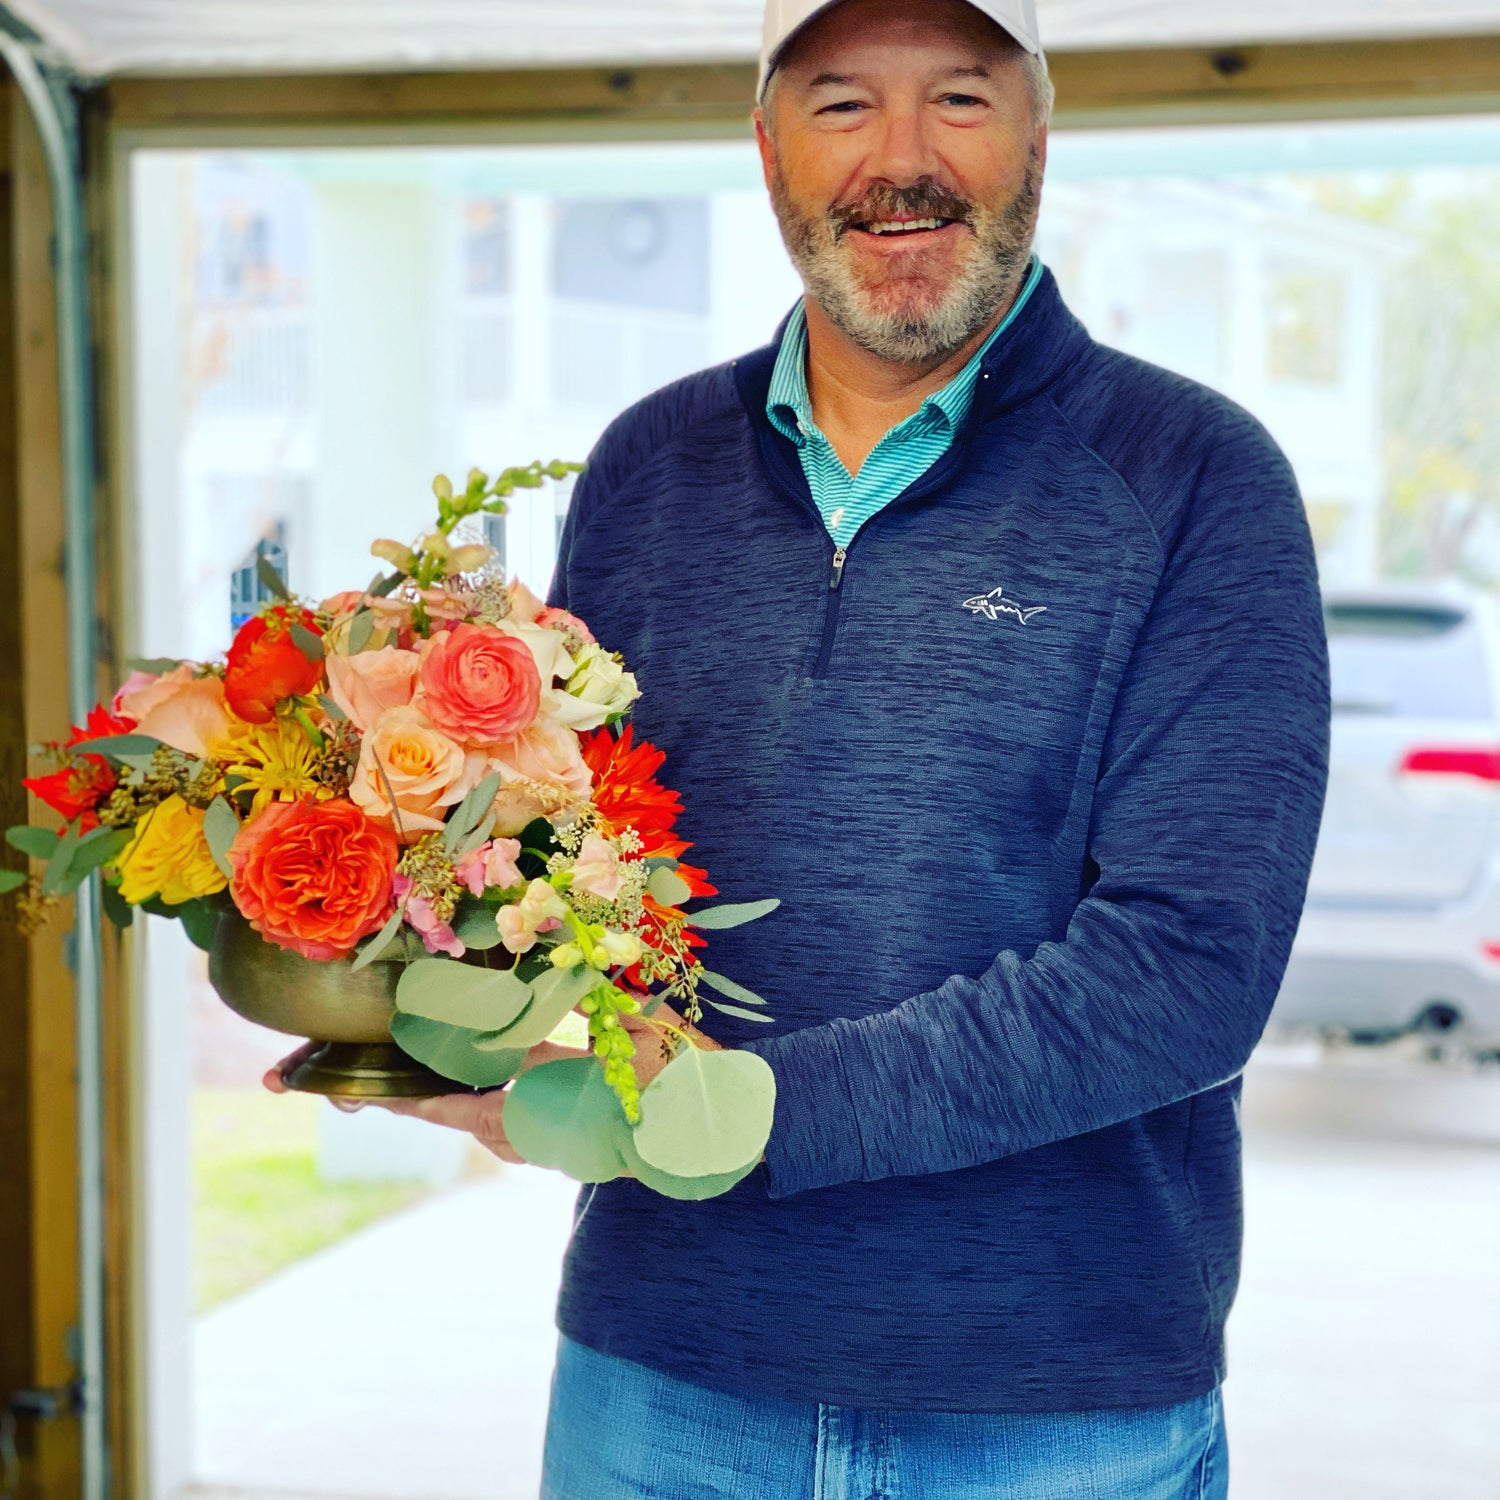 Thanksgiving centerpiece delivery in Mt Pleasant.  Smiling delivery man with flowers from Boone's Blooms. Pretty oranges and yellow fall flowers.